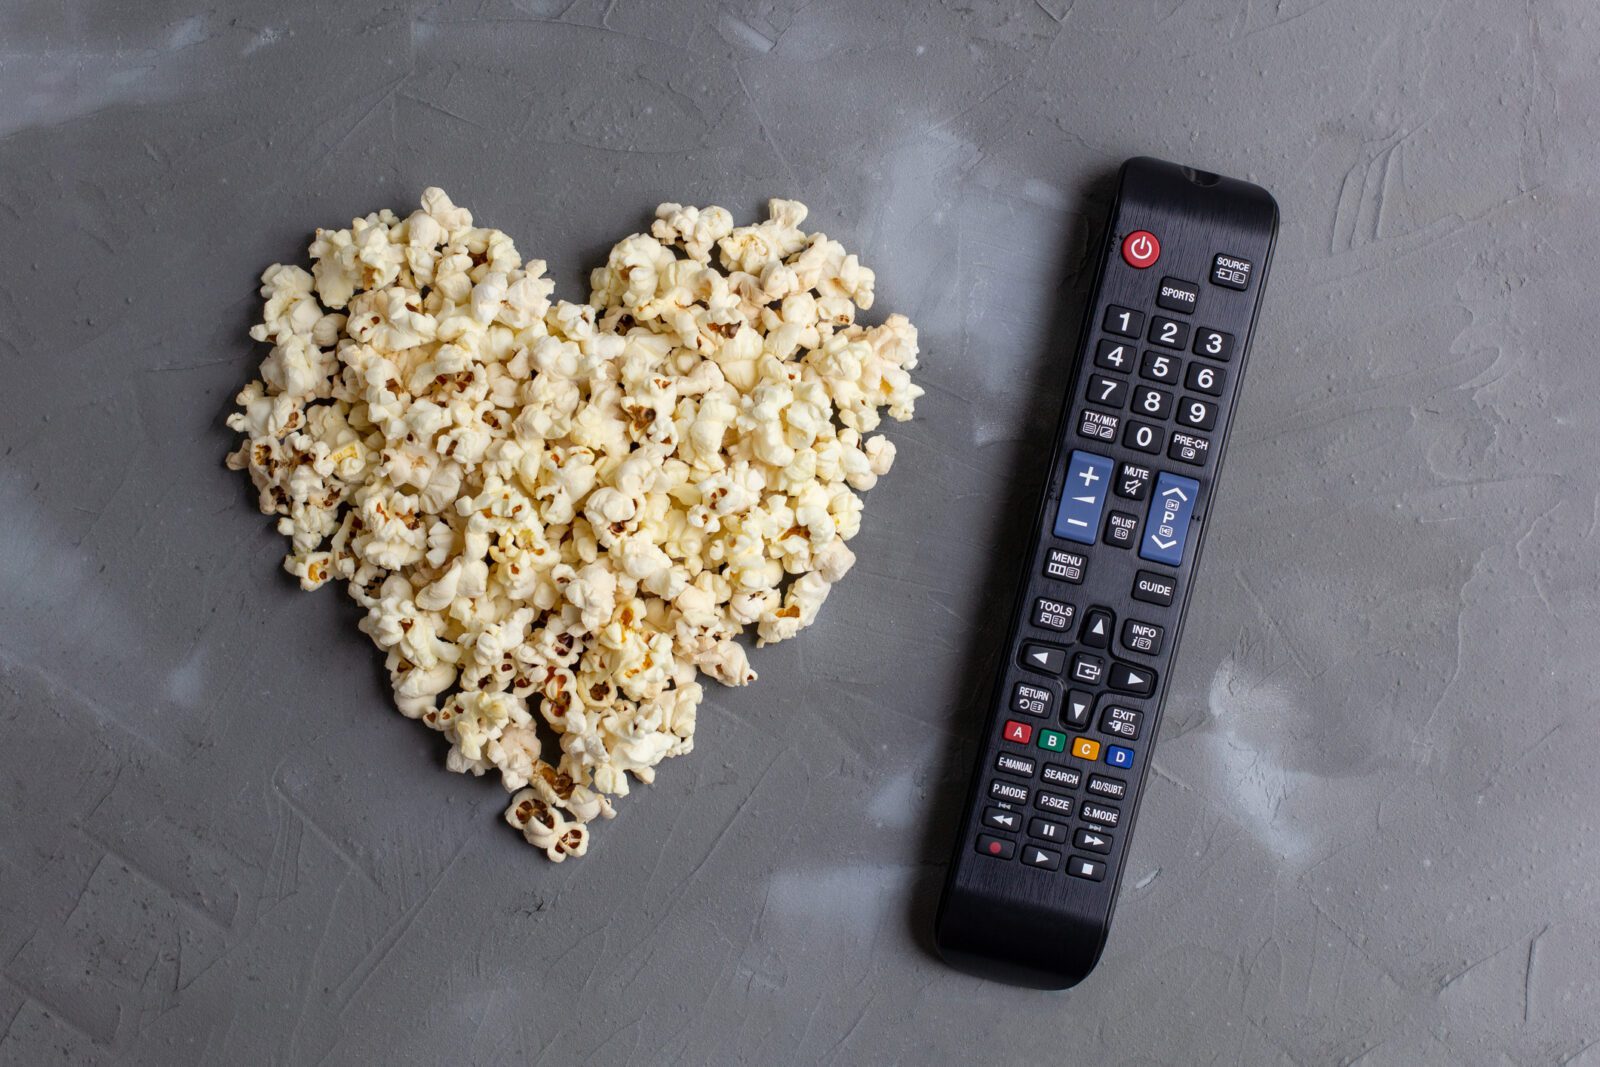 Popcorn in the shape of a heart and TV remote on grey stone background